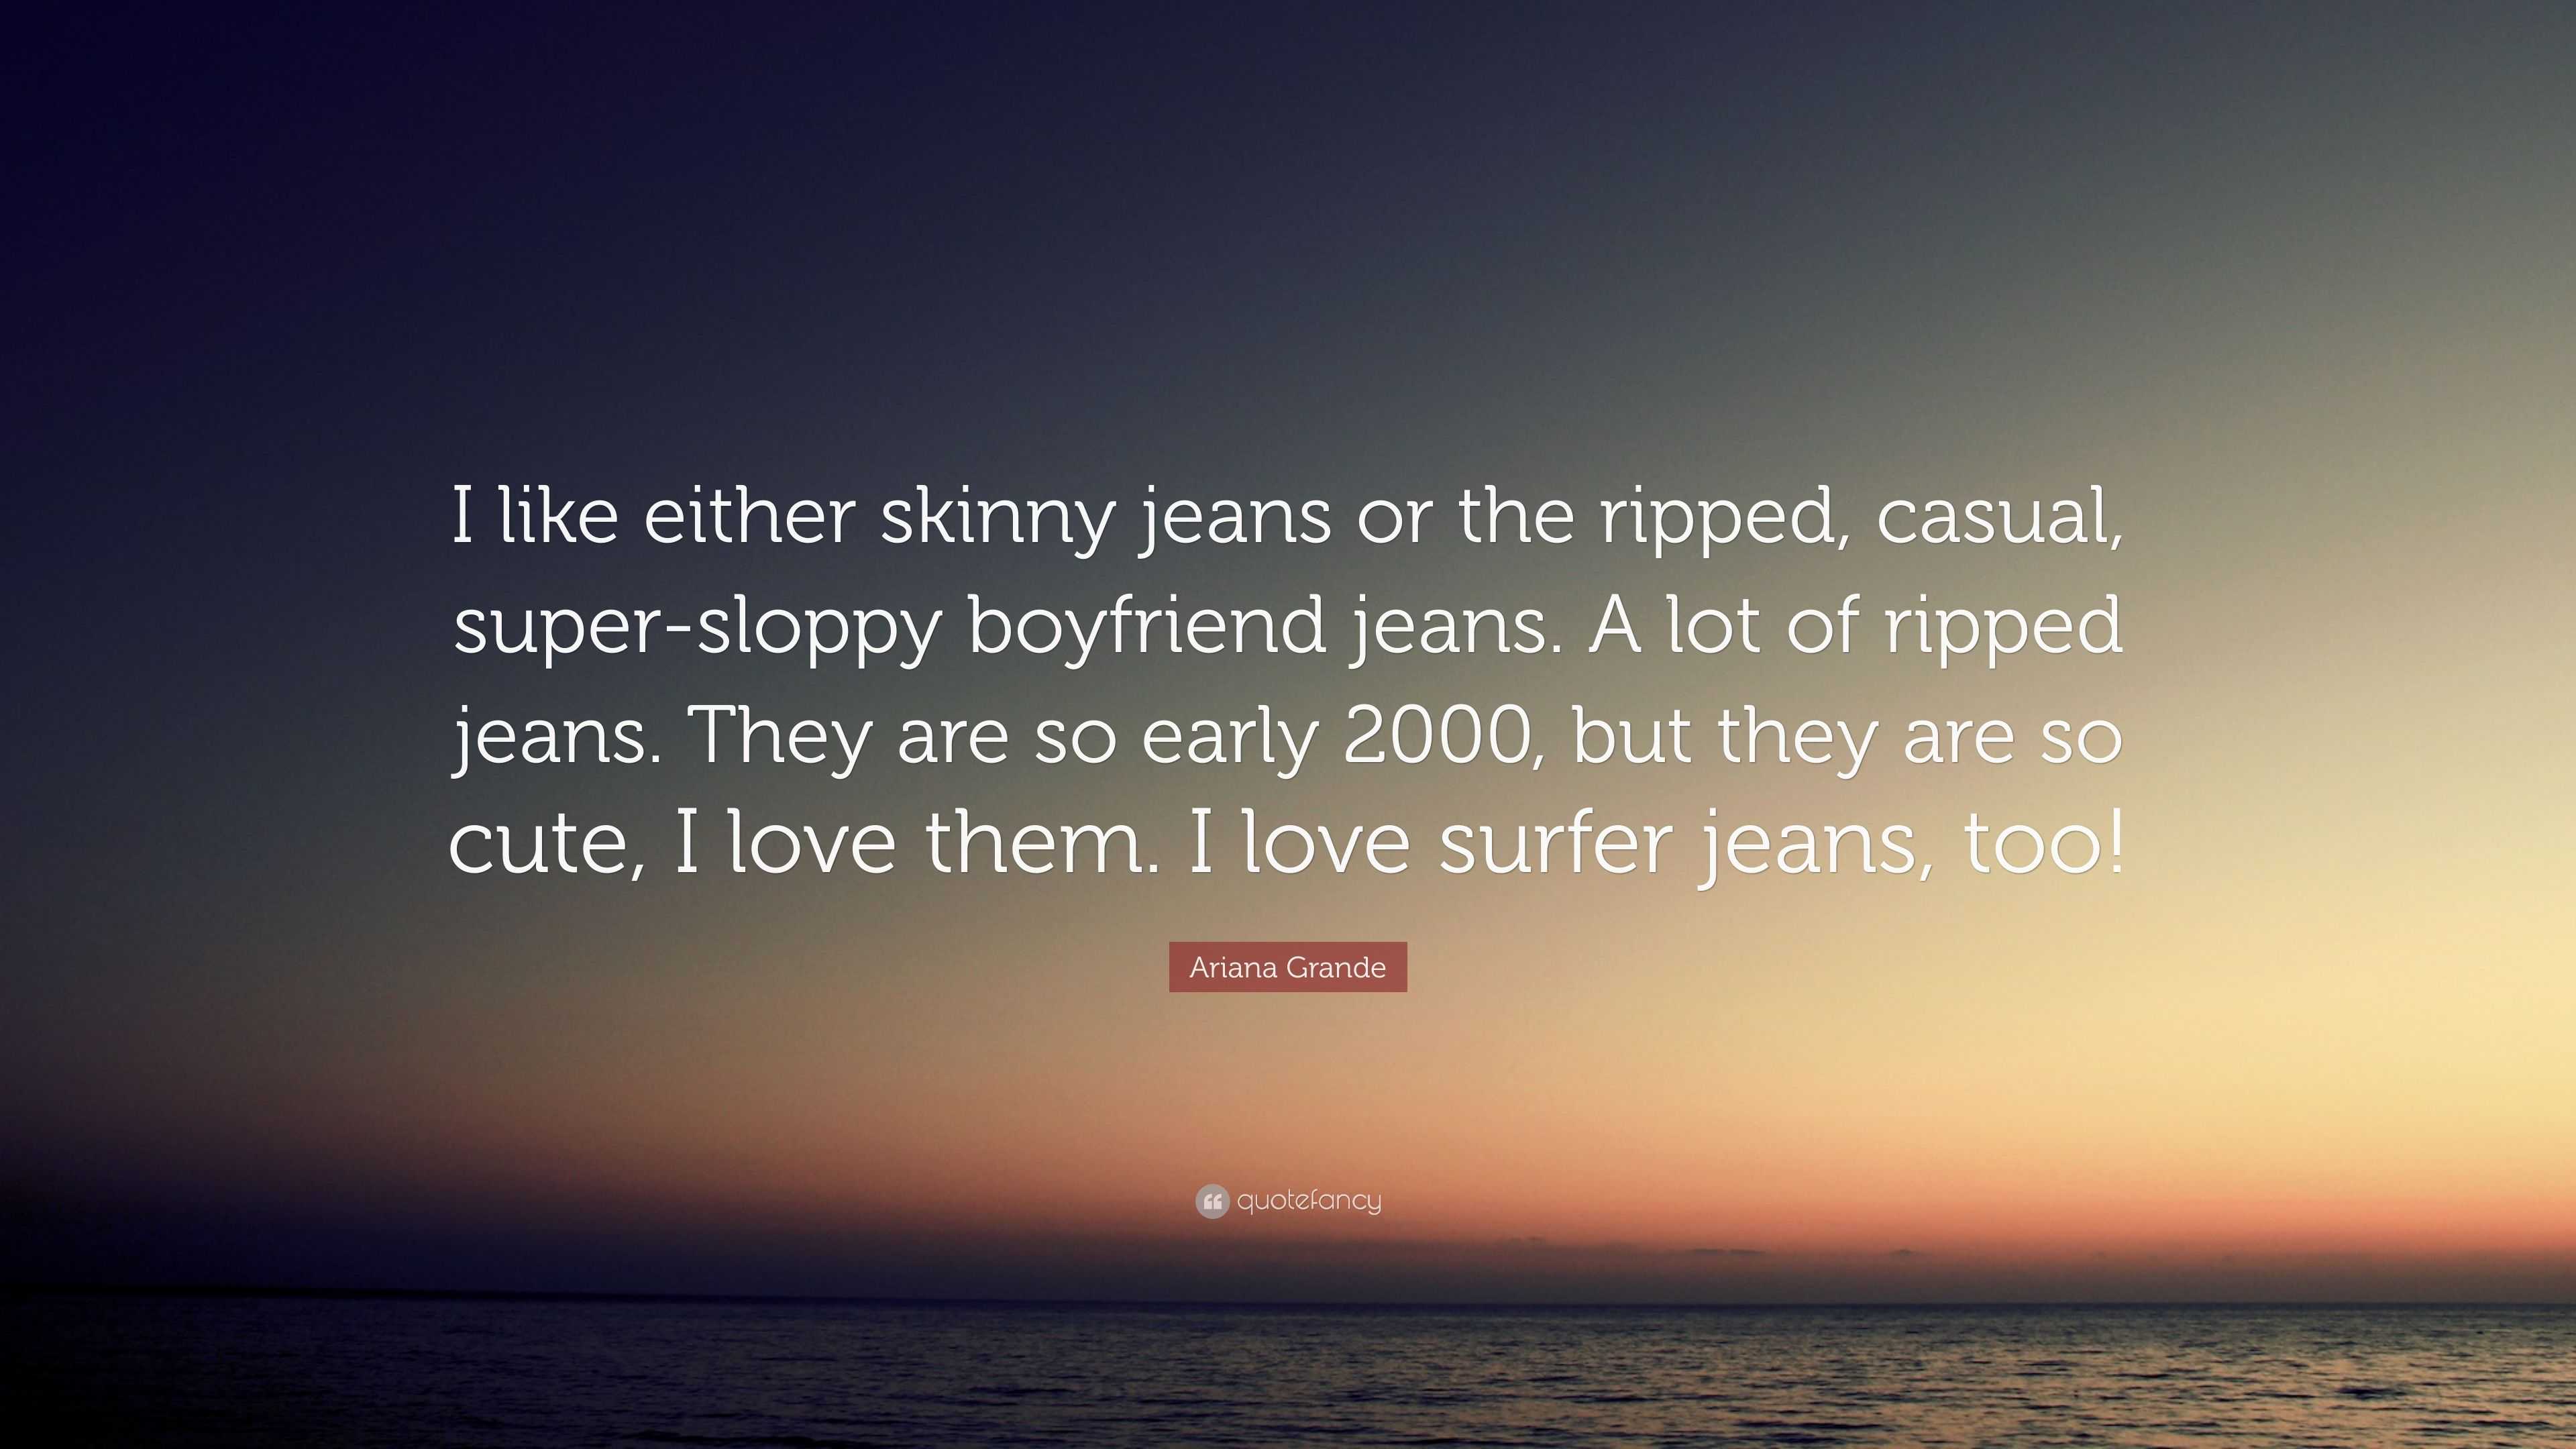 Ariana Grande Quote: “I like either skinny jeans or the ripped, casual ...